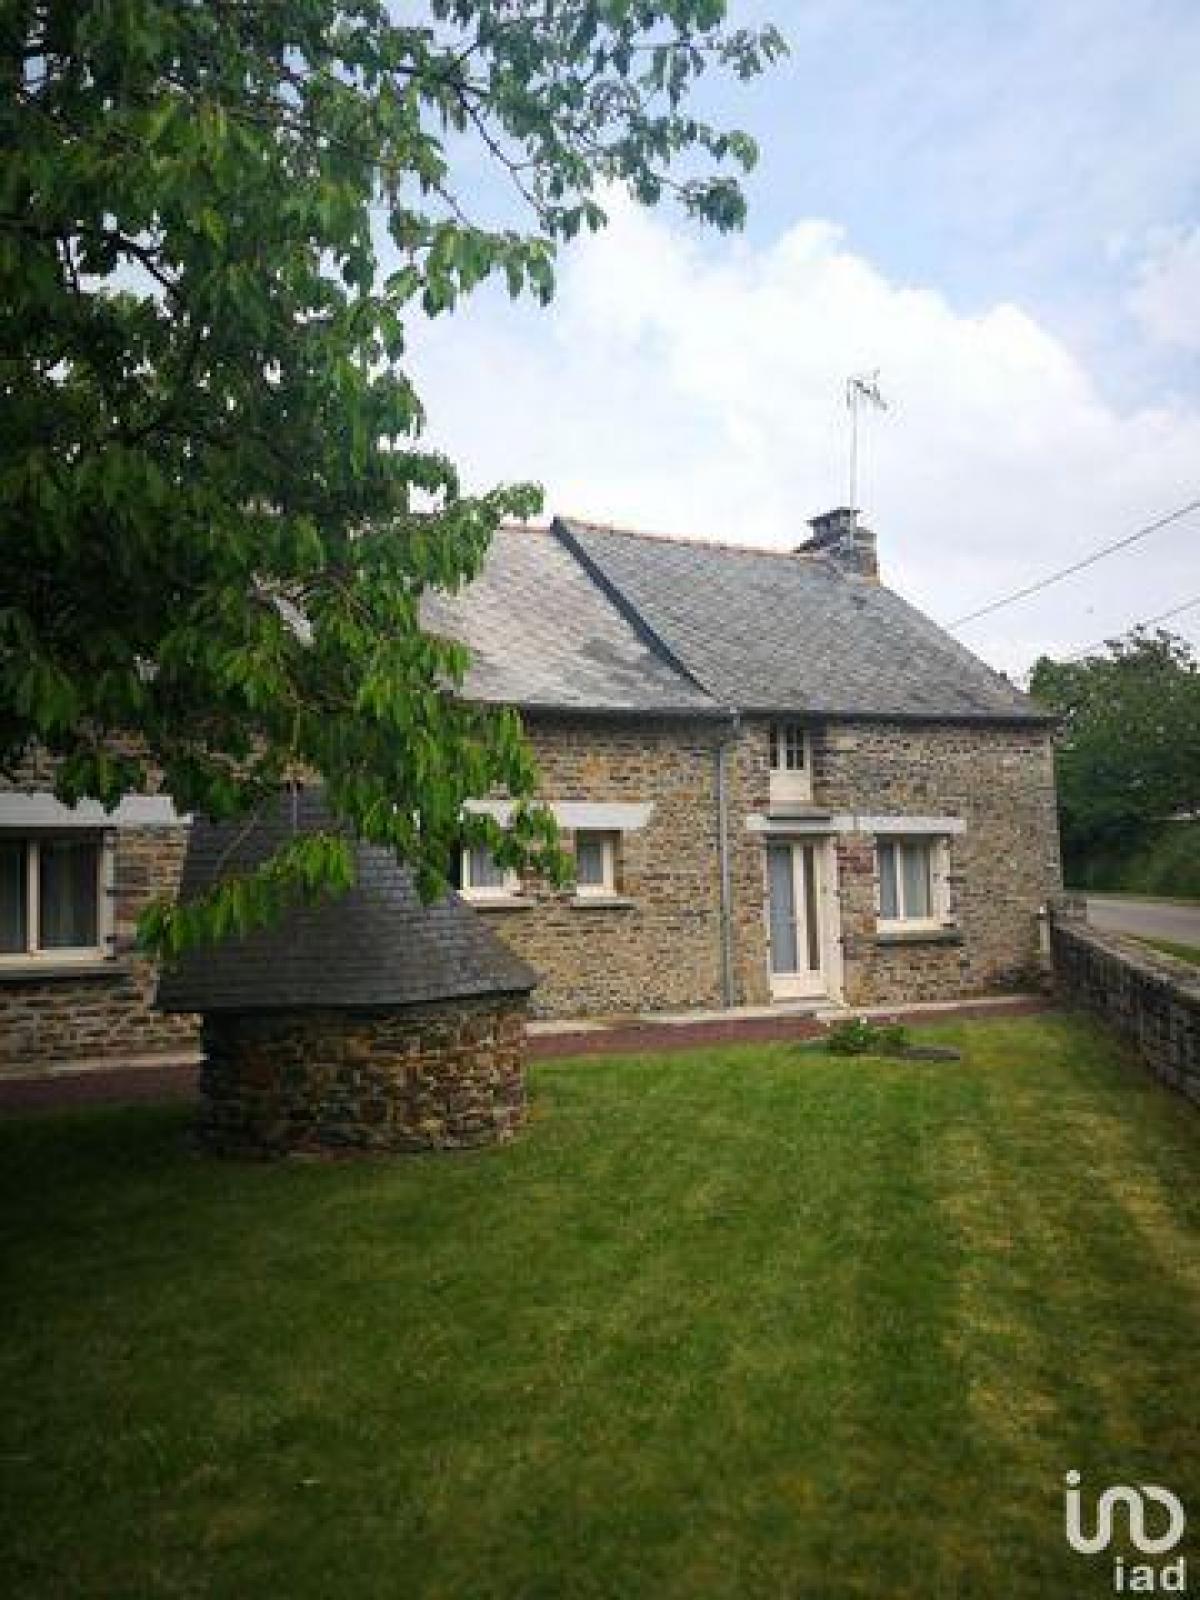 Picture of Home For Sale in Mauron, Bretagne, France